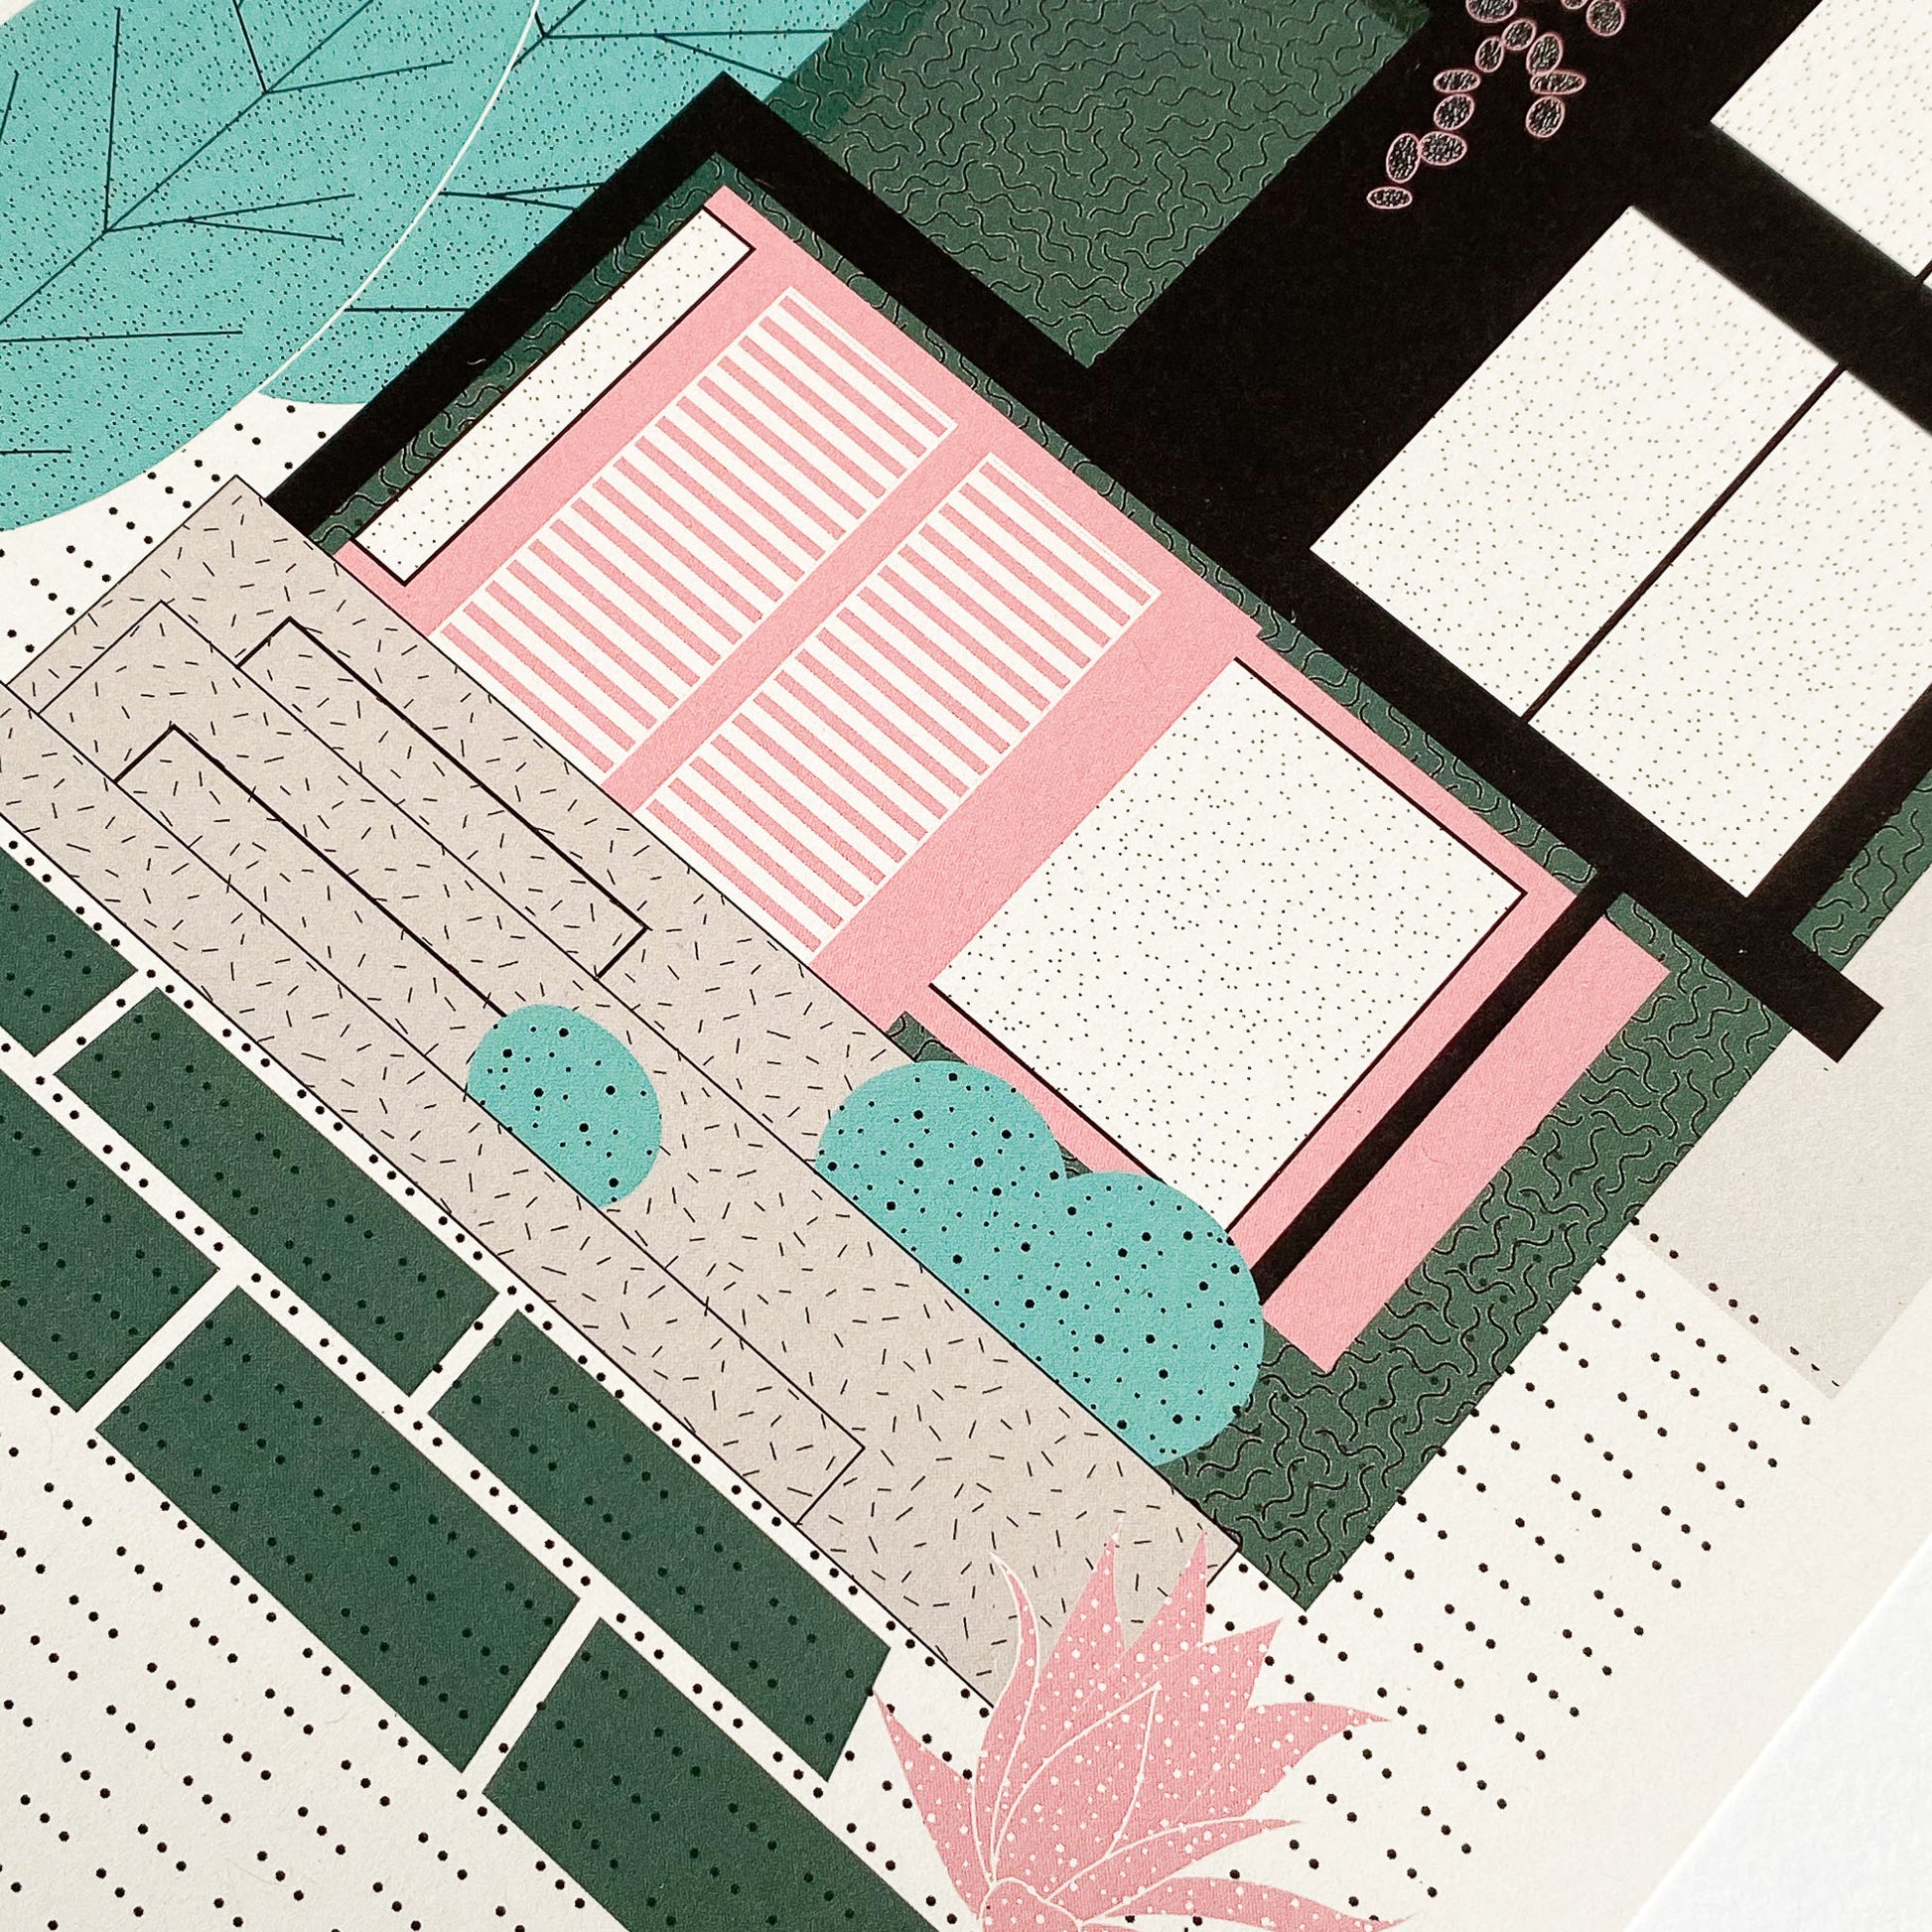 Green Mid Century Townhouse Art Print by The Print Lass. Detail.